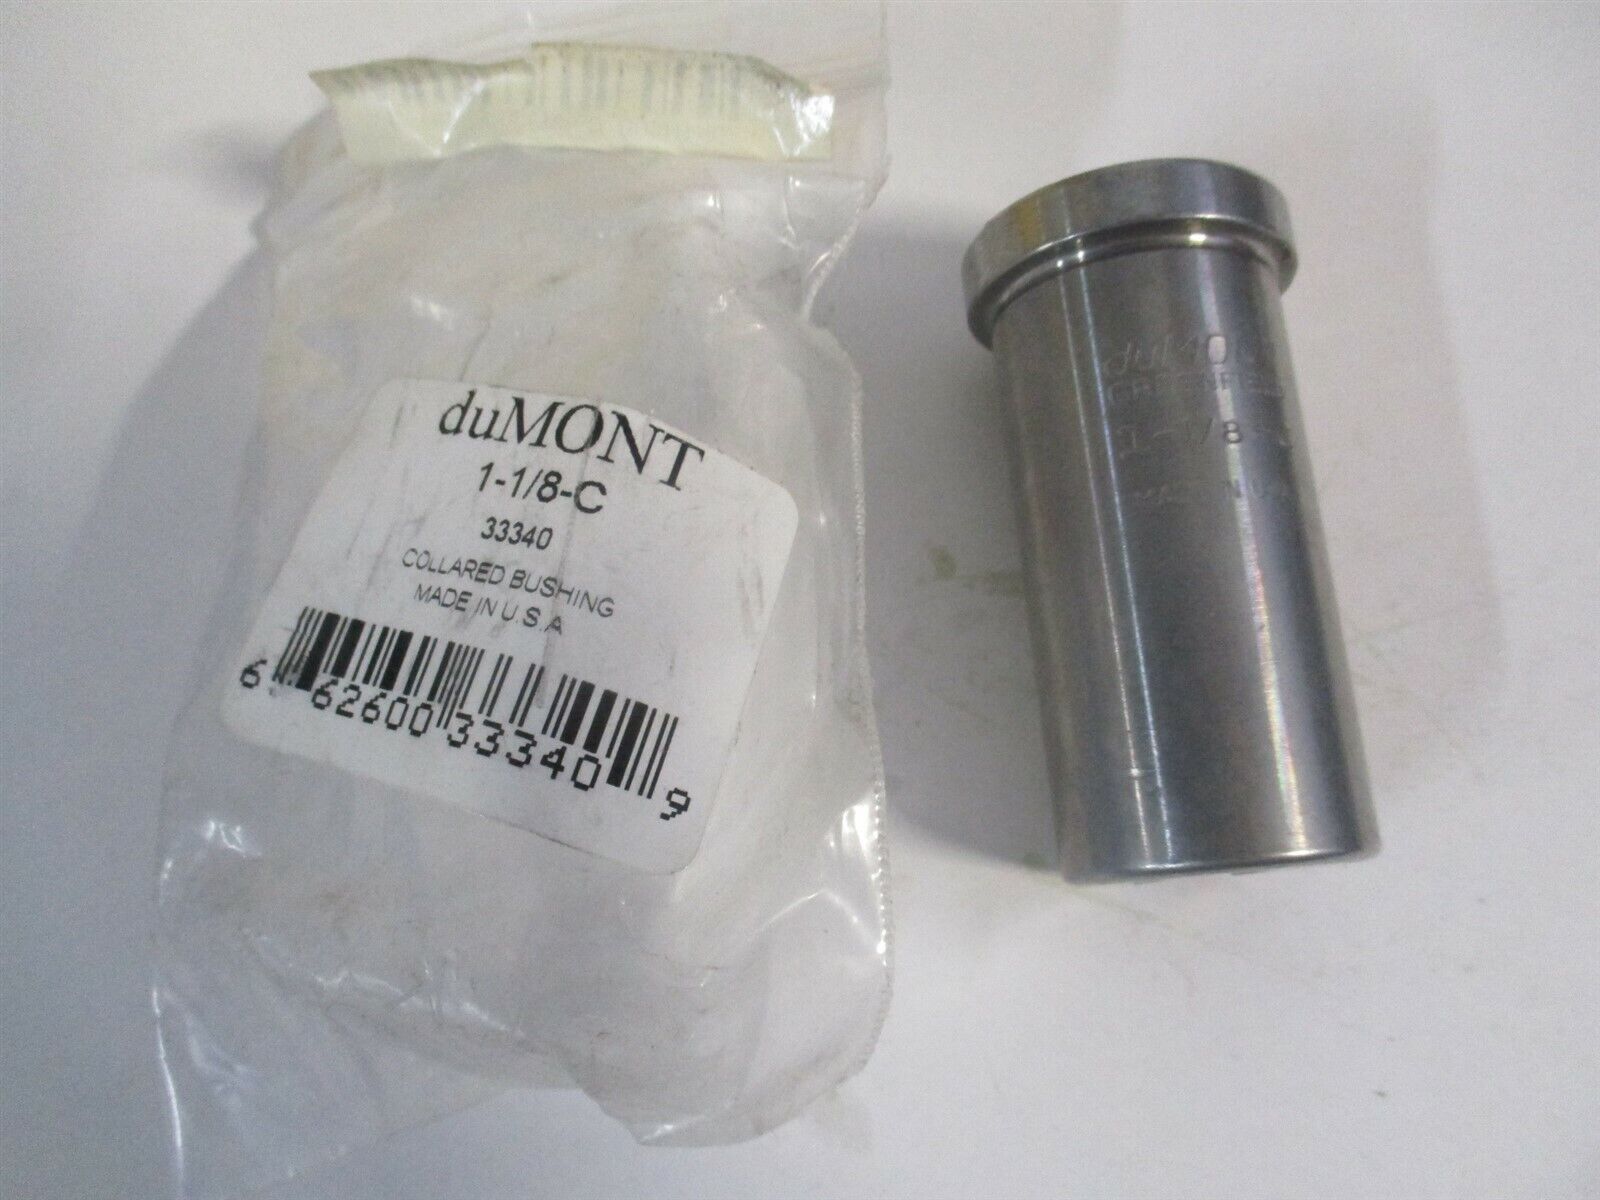 Dumont (33340) 1-1/8" X 2-1/2" Oal Style C Collared Broach Bushing